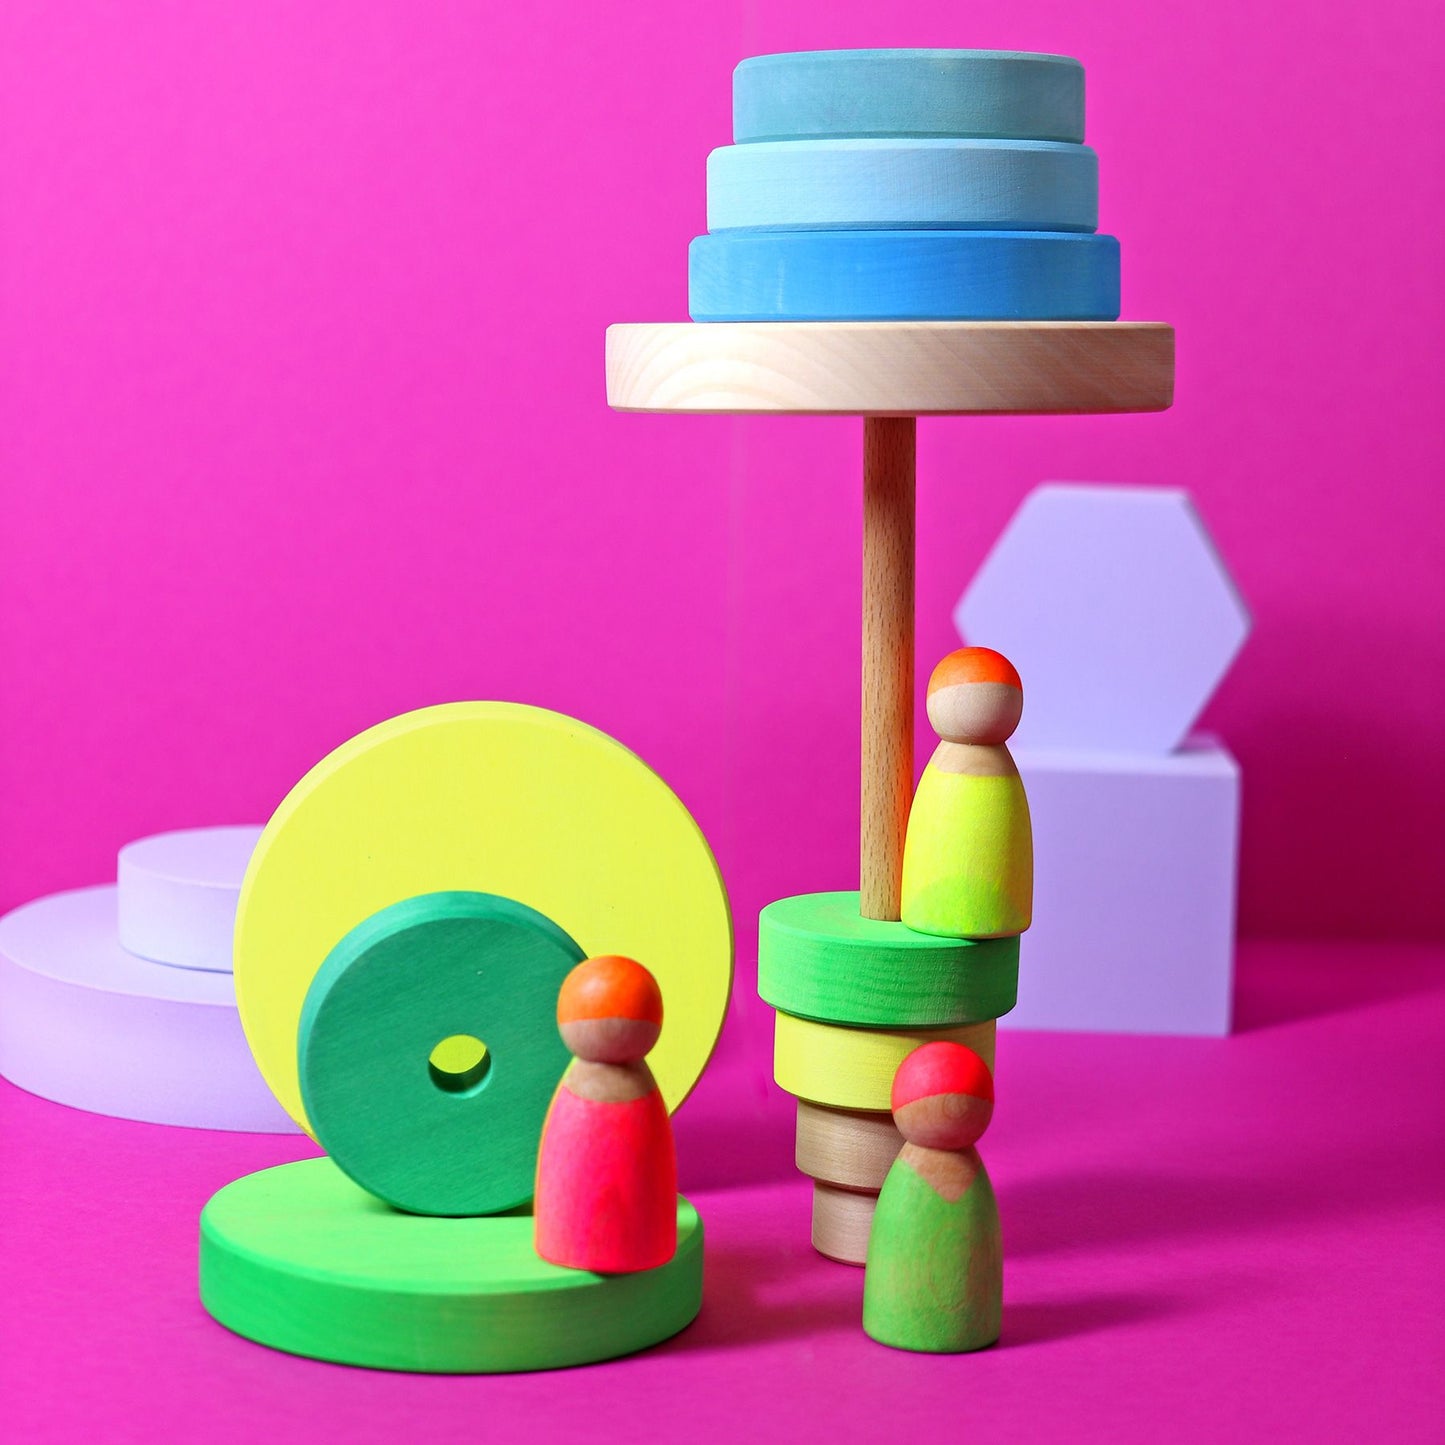 Mixed Neon Friends | 3 Wooden Toy Figures | Grimm's X Neon Collection